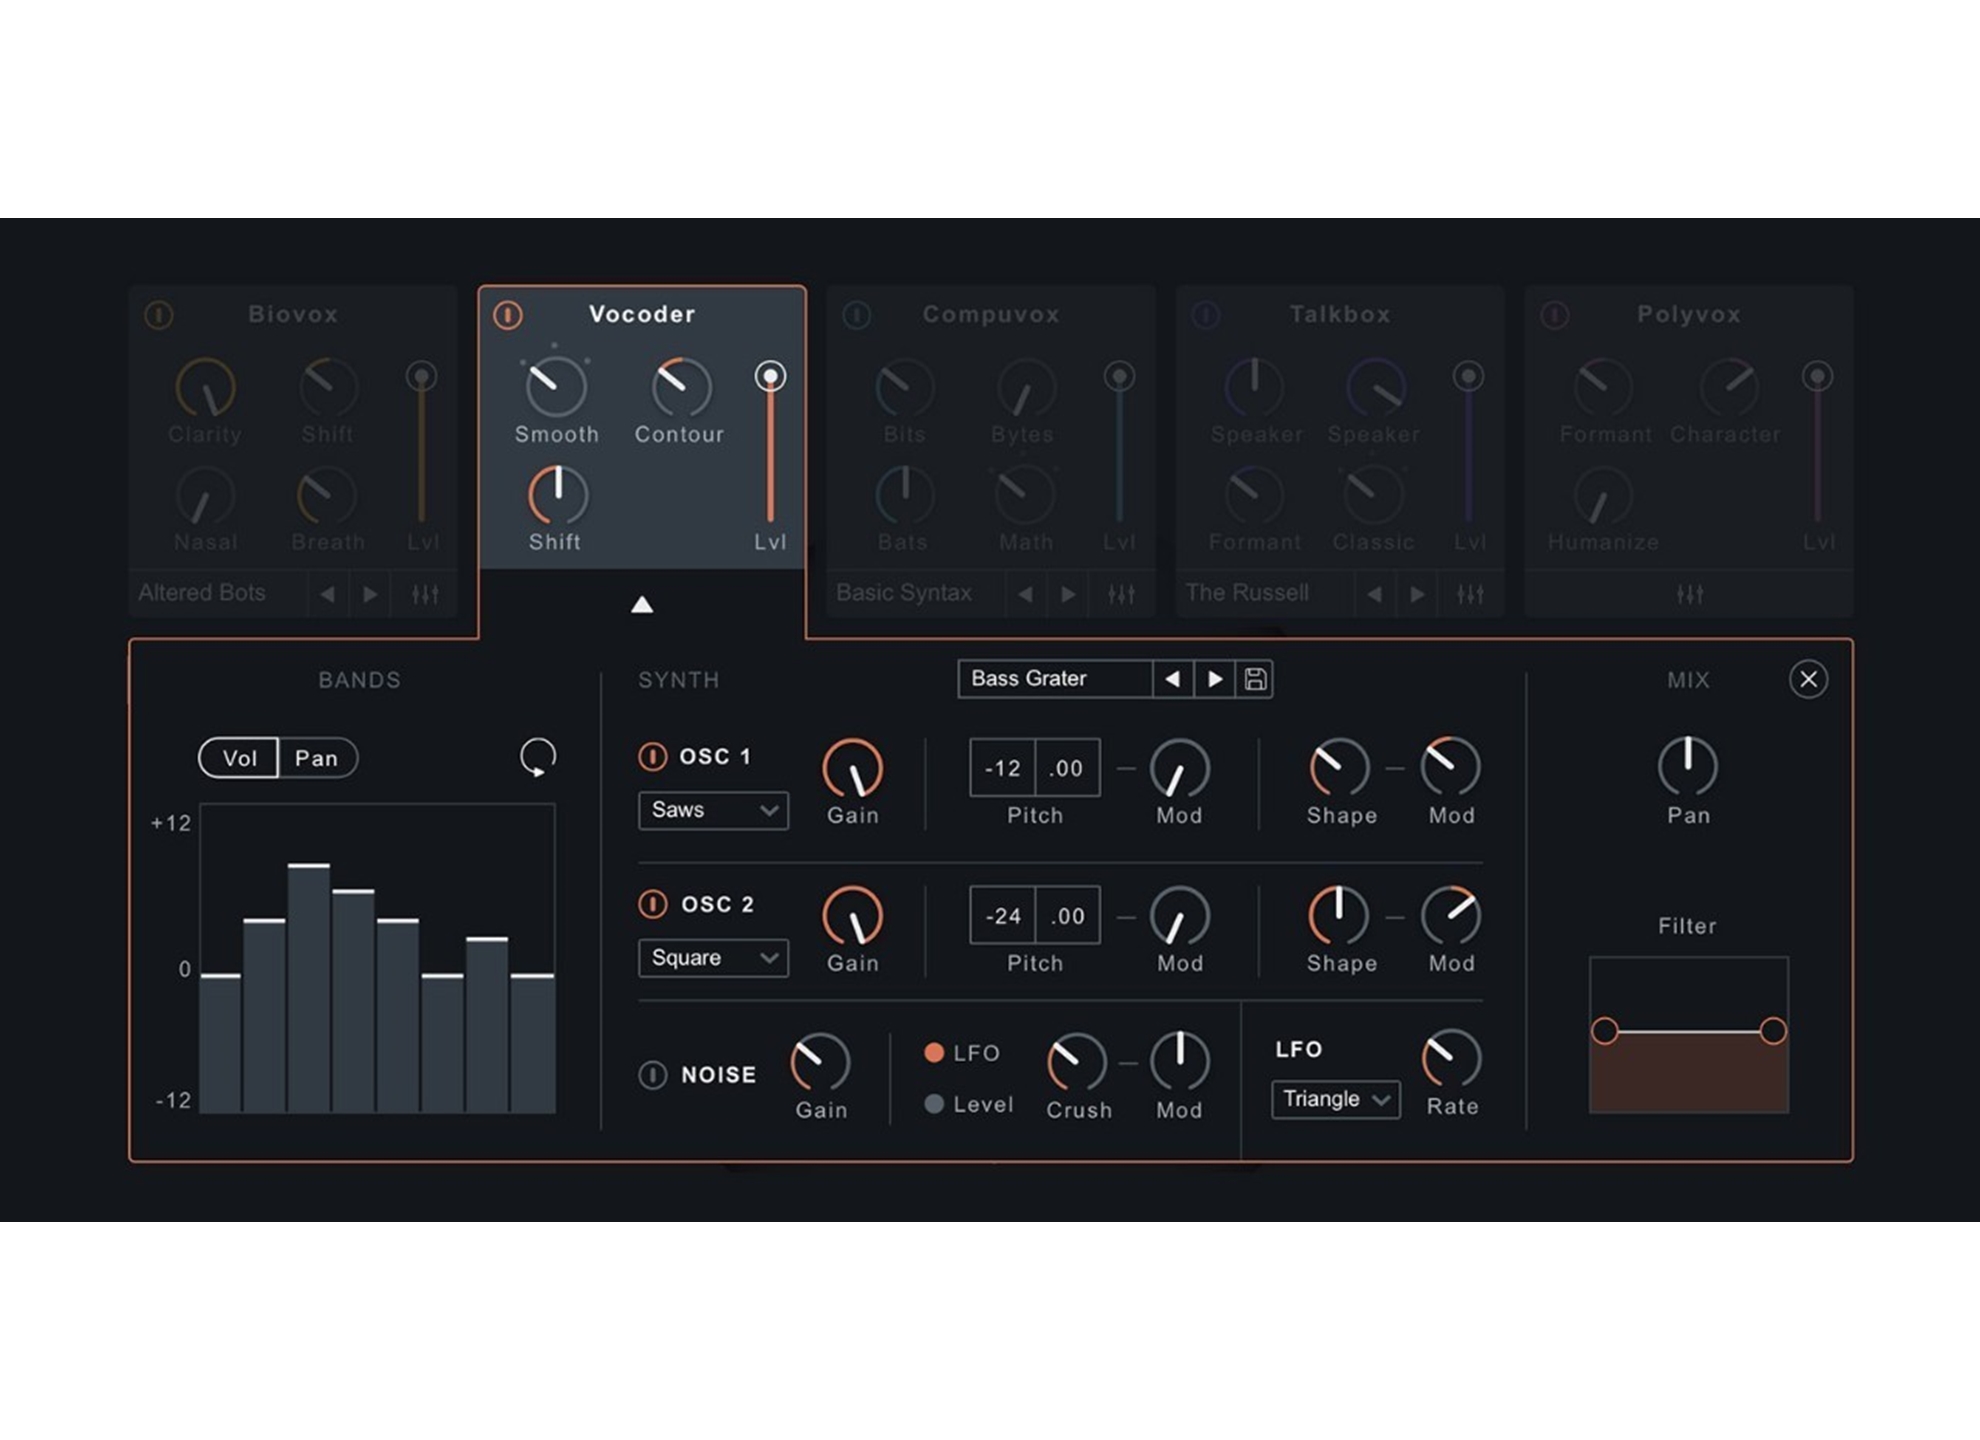 iZotope VocalSynth 2.6.1 download the last version for android